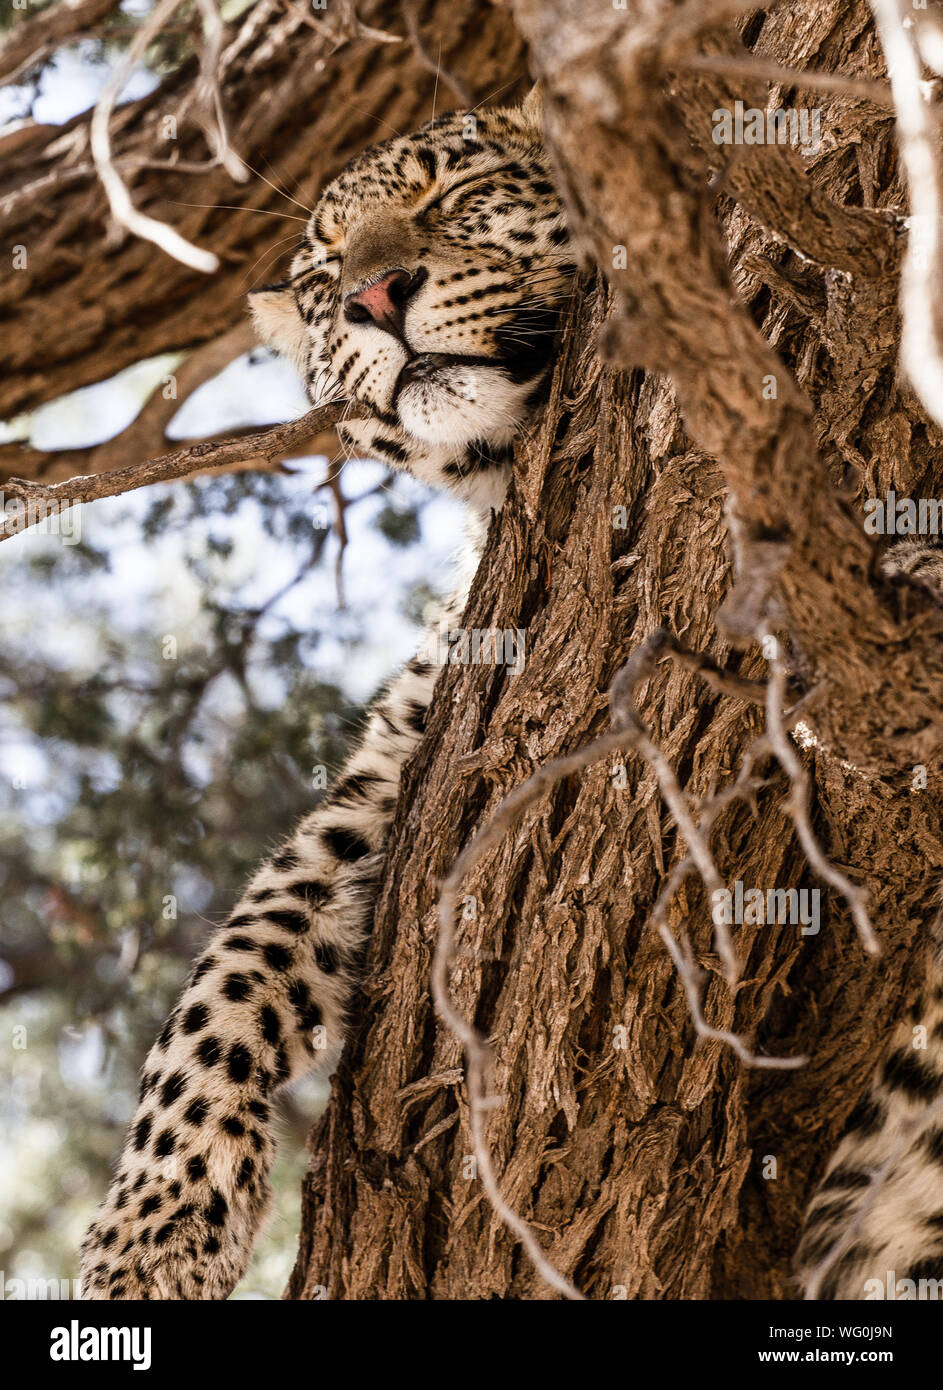 Low Angle View Of Leopard On Tree Stock Photo